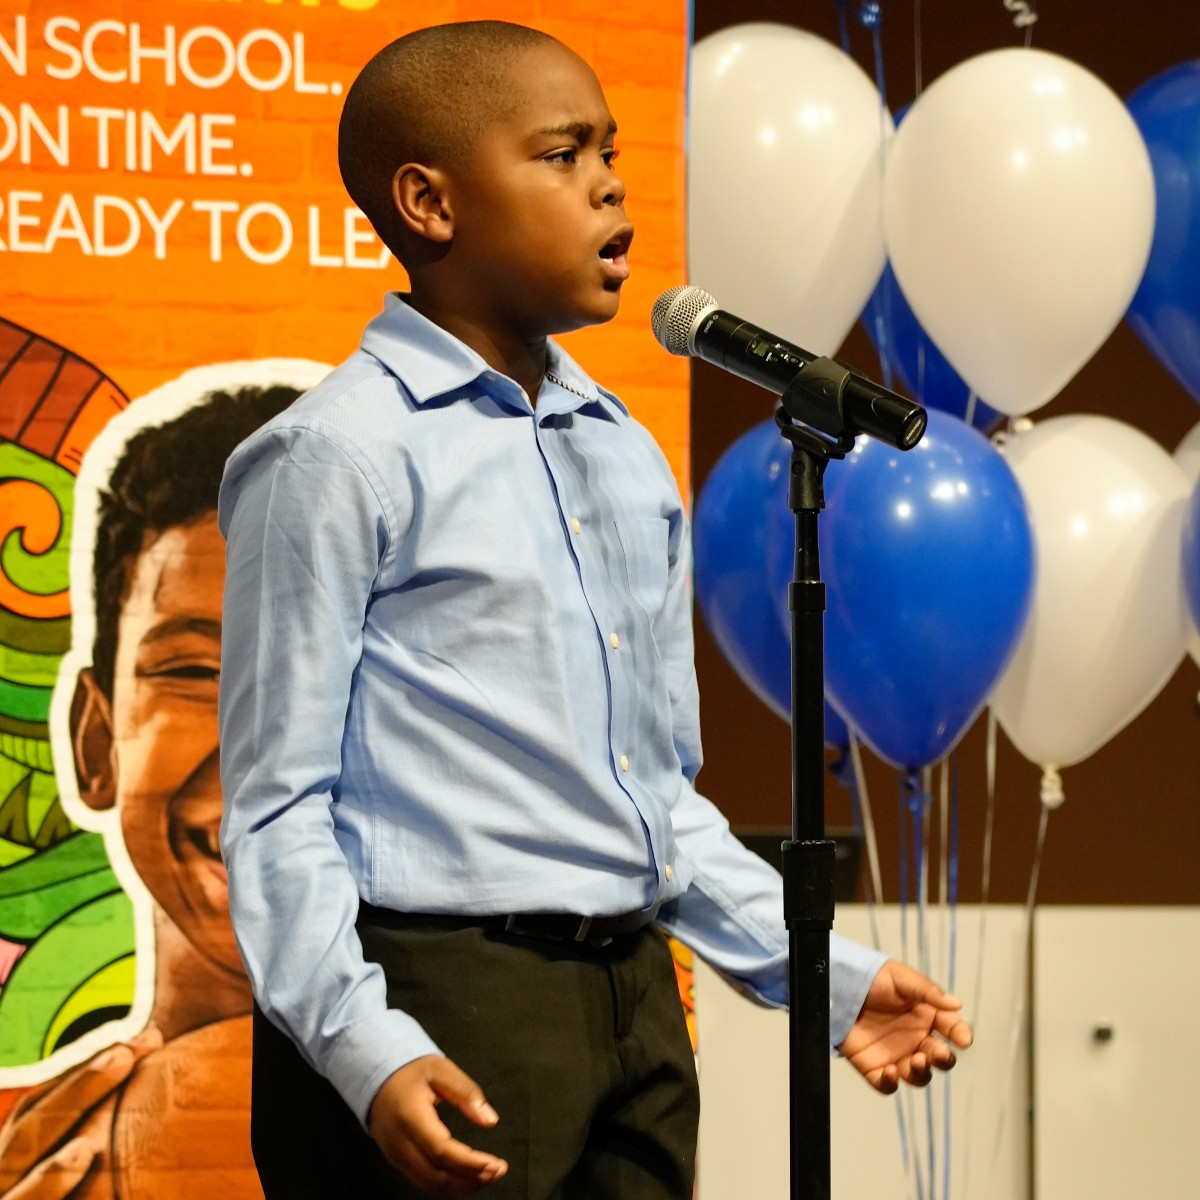 They're headed to Columbus! 11 CPS students are on their way to compete in the Ohio Dr. Martin Luther King, Jr. Statewide Oratorical Contest after giving their rousing speeches earlier this year at the CPS Ed. Center! Wish them good luck! Learn more at: brnw.ch/21wJcR7